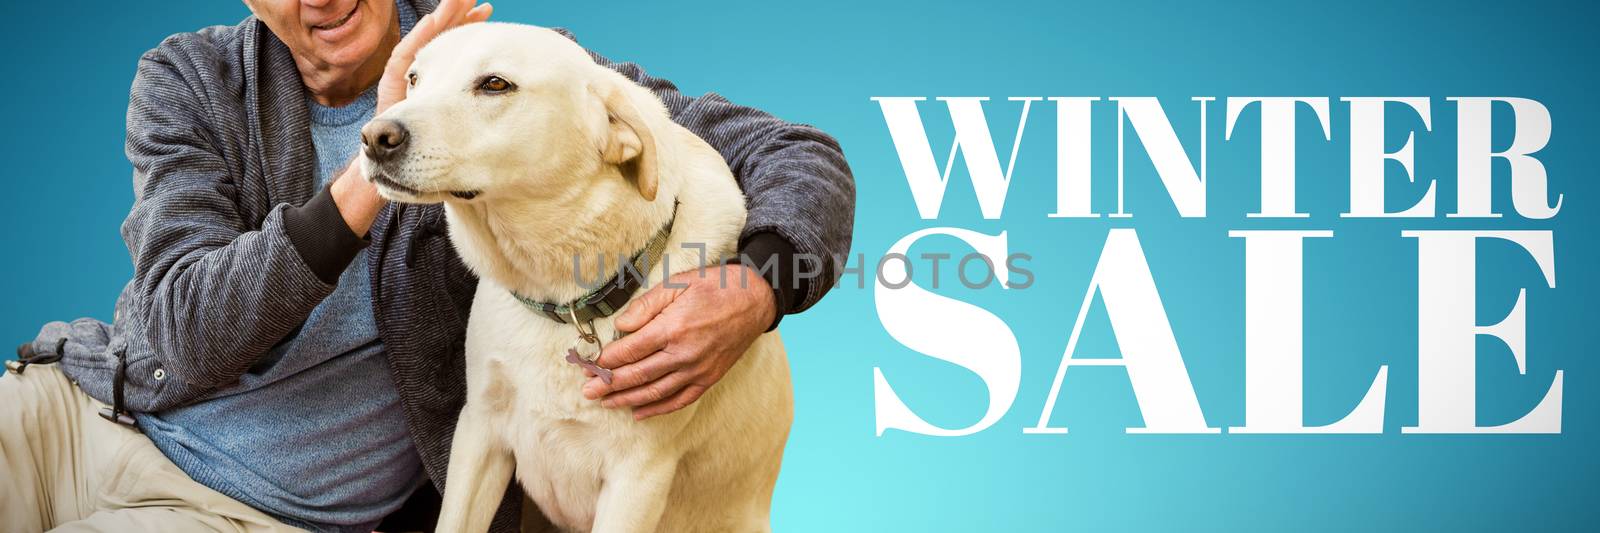 Smiling old man sitting stroking his pet dog against abstract blue background